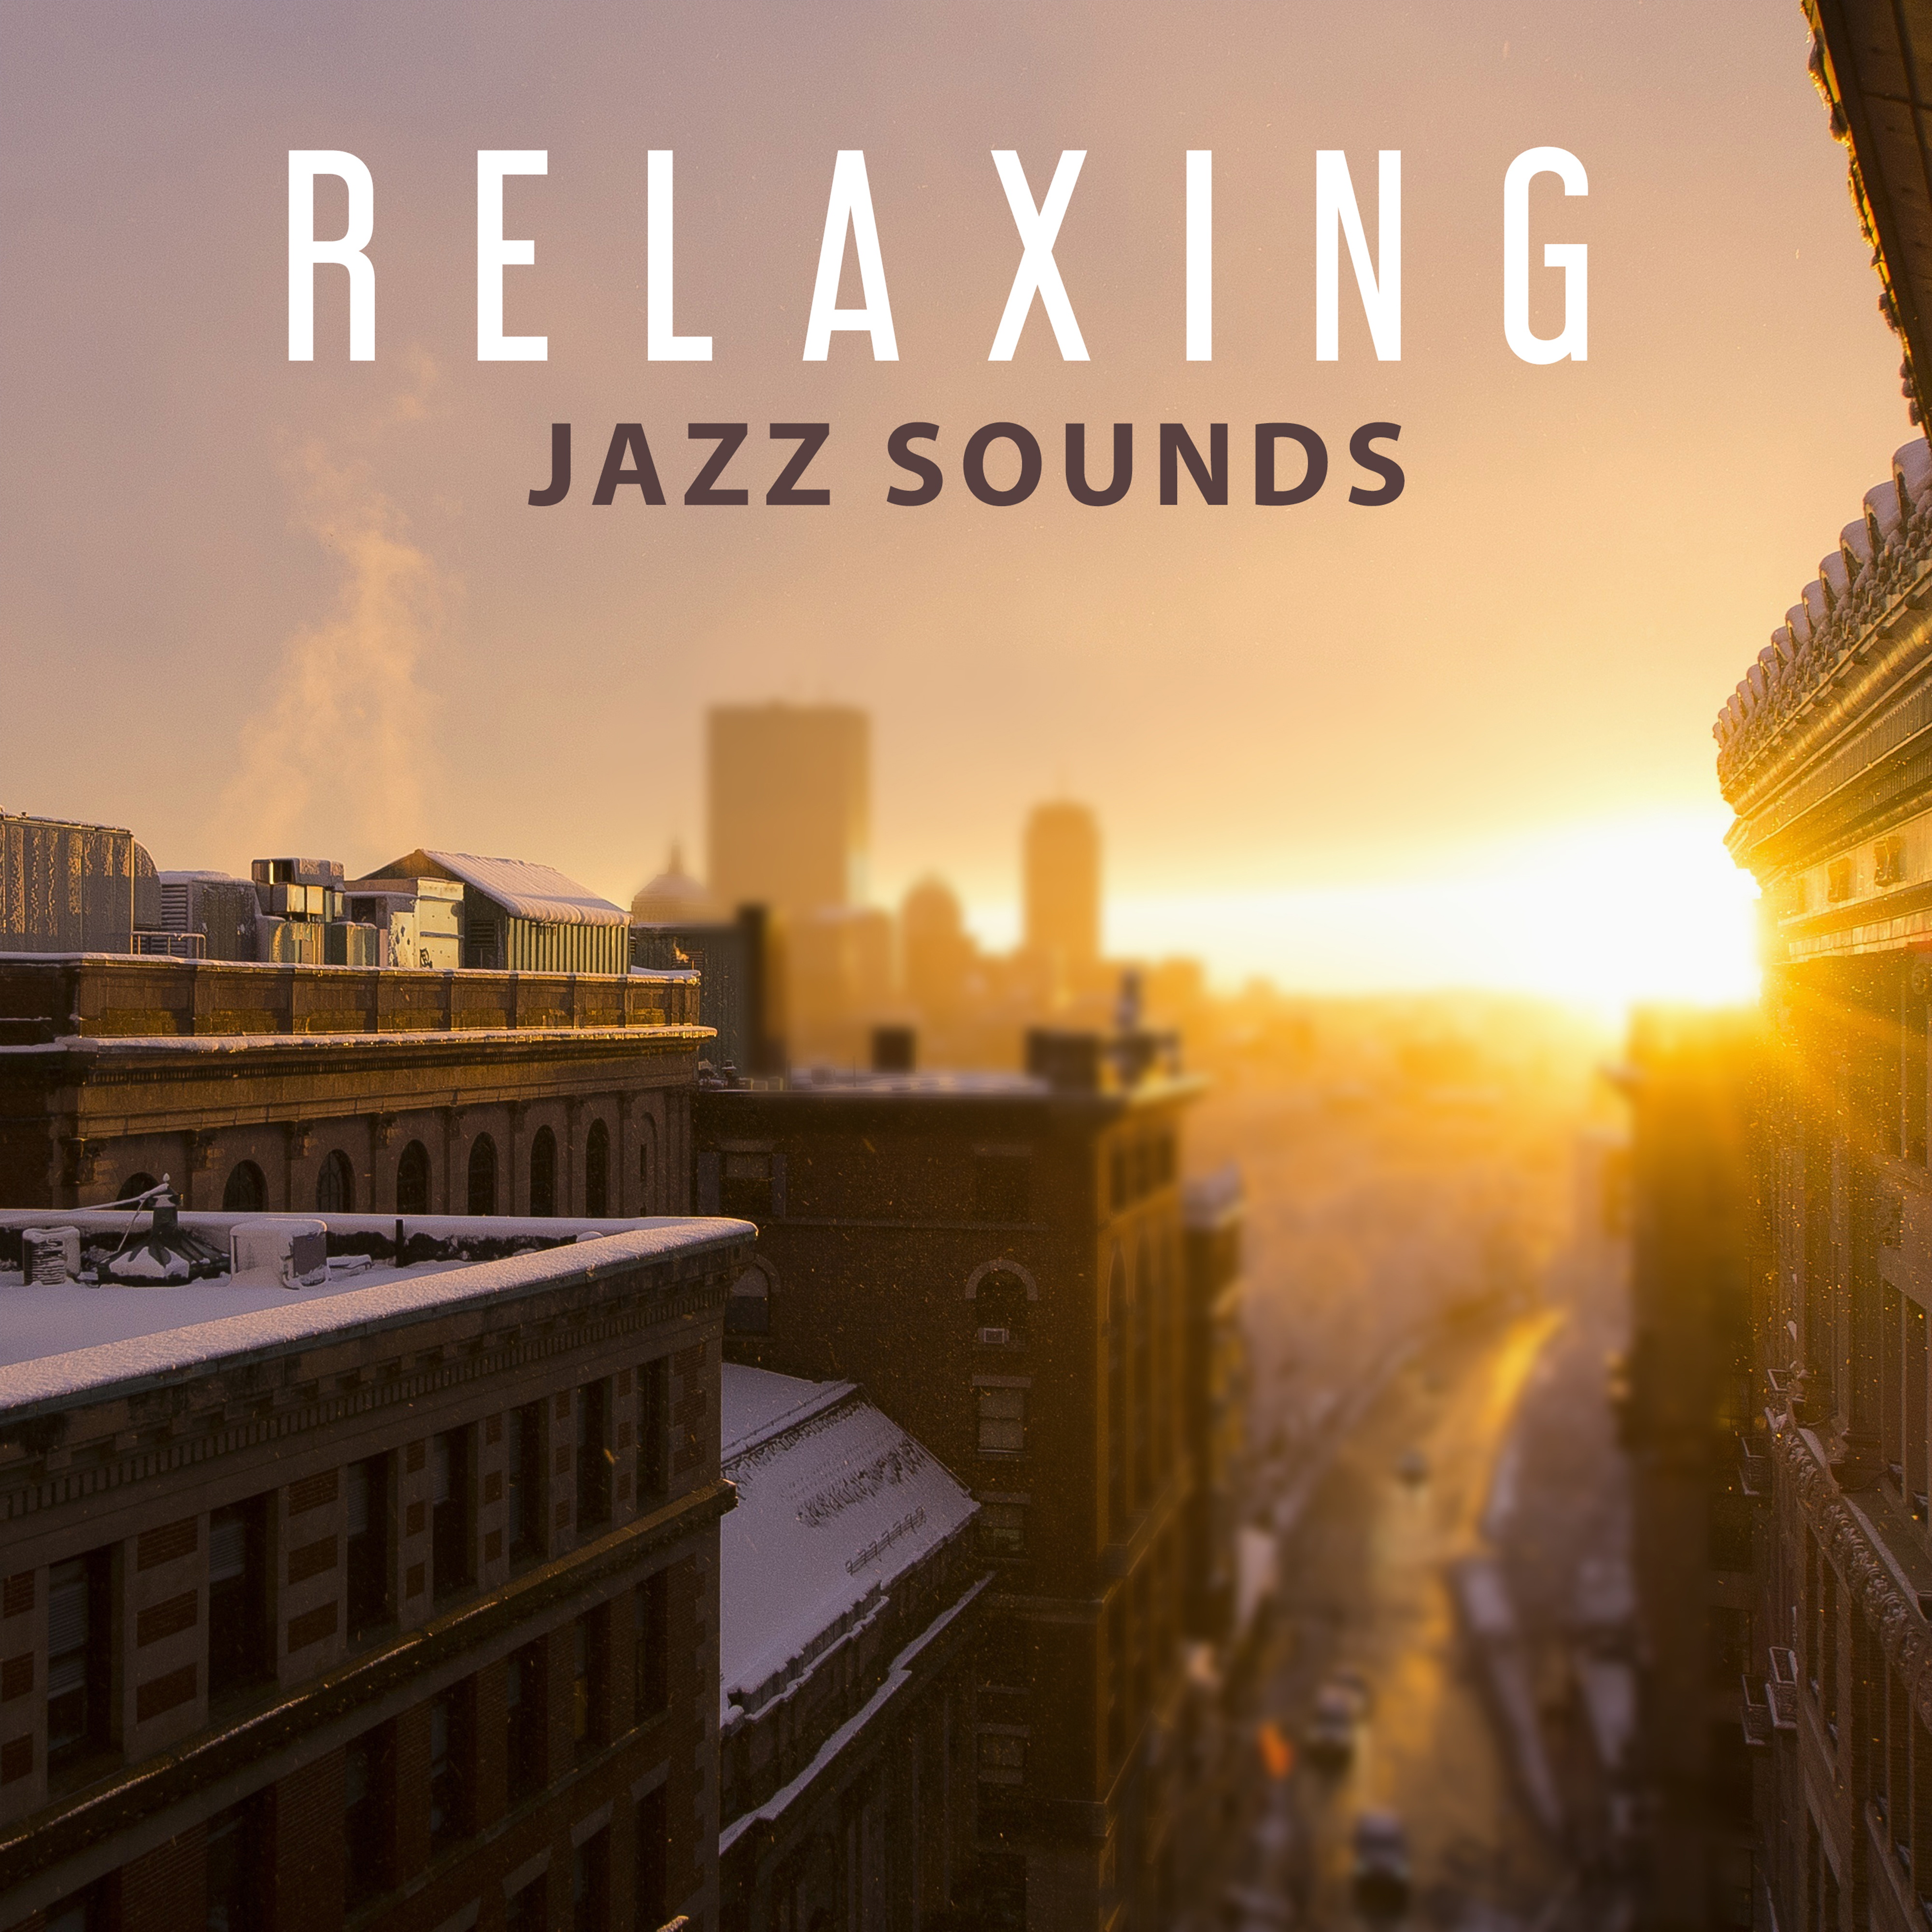 Relaxing Jazz Sounds – Instrumental Music for Relax Time, Easy Listening Soft Classic Melodies